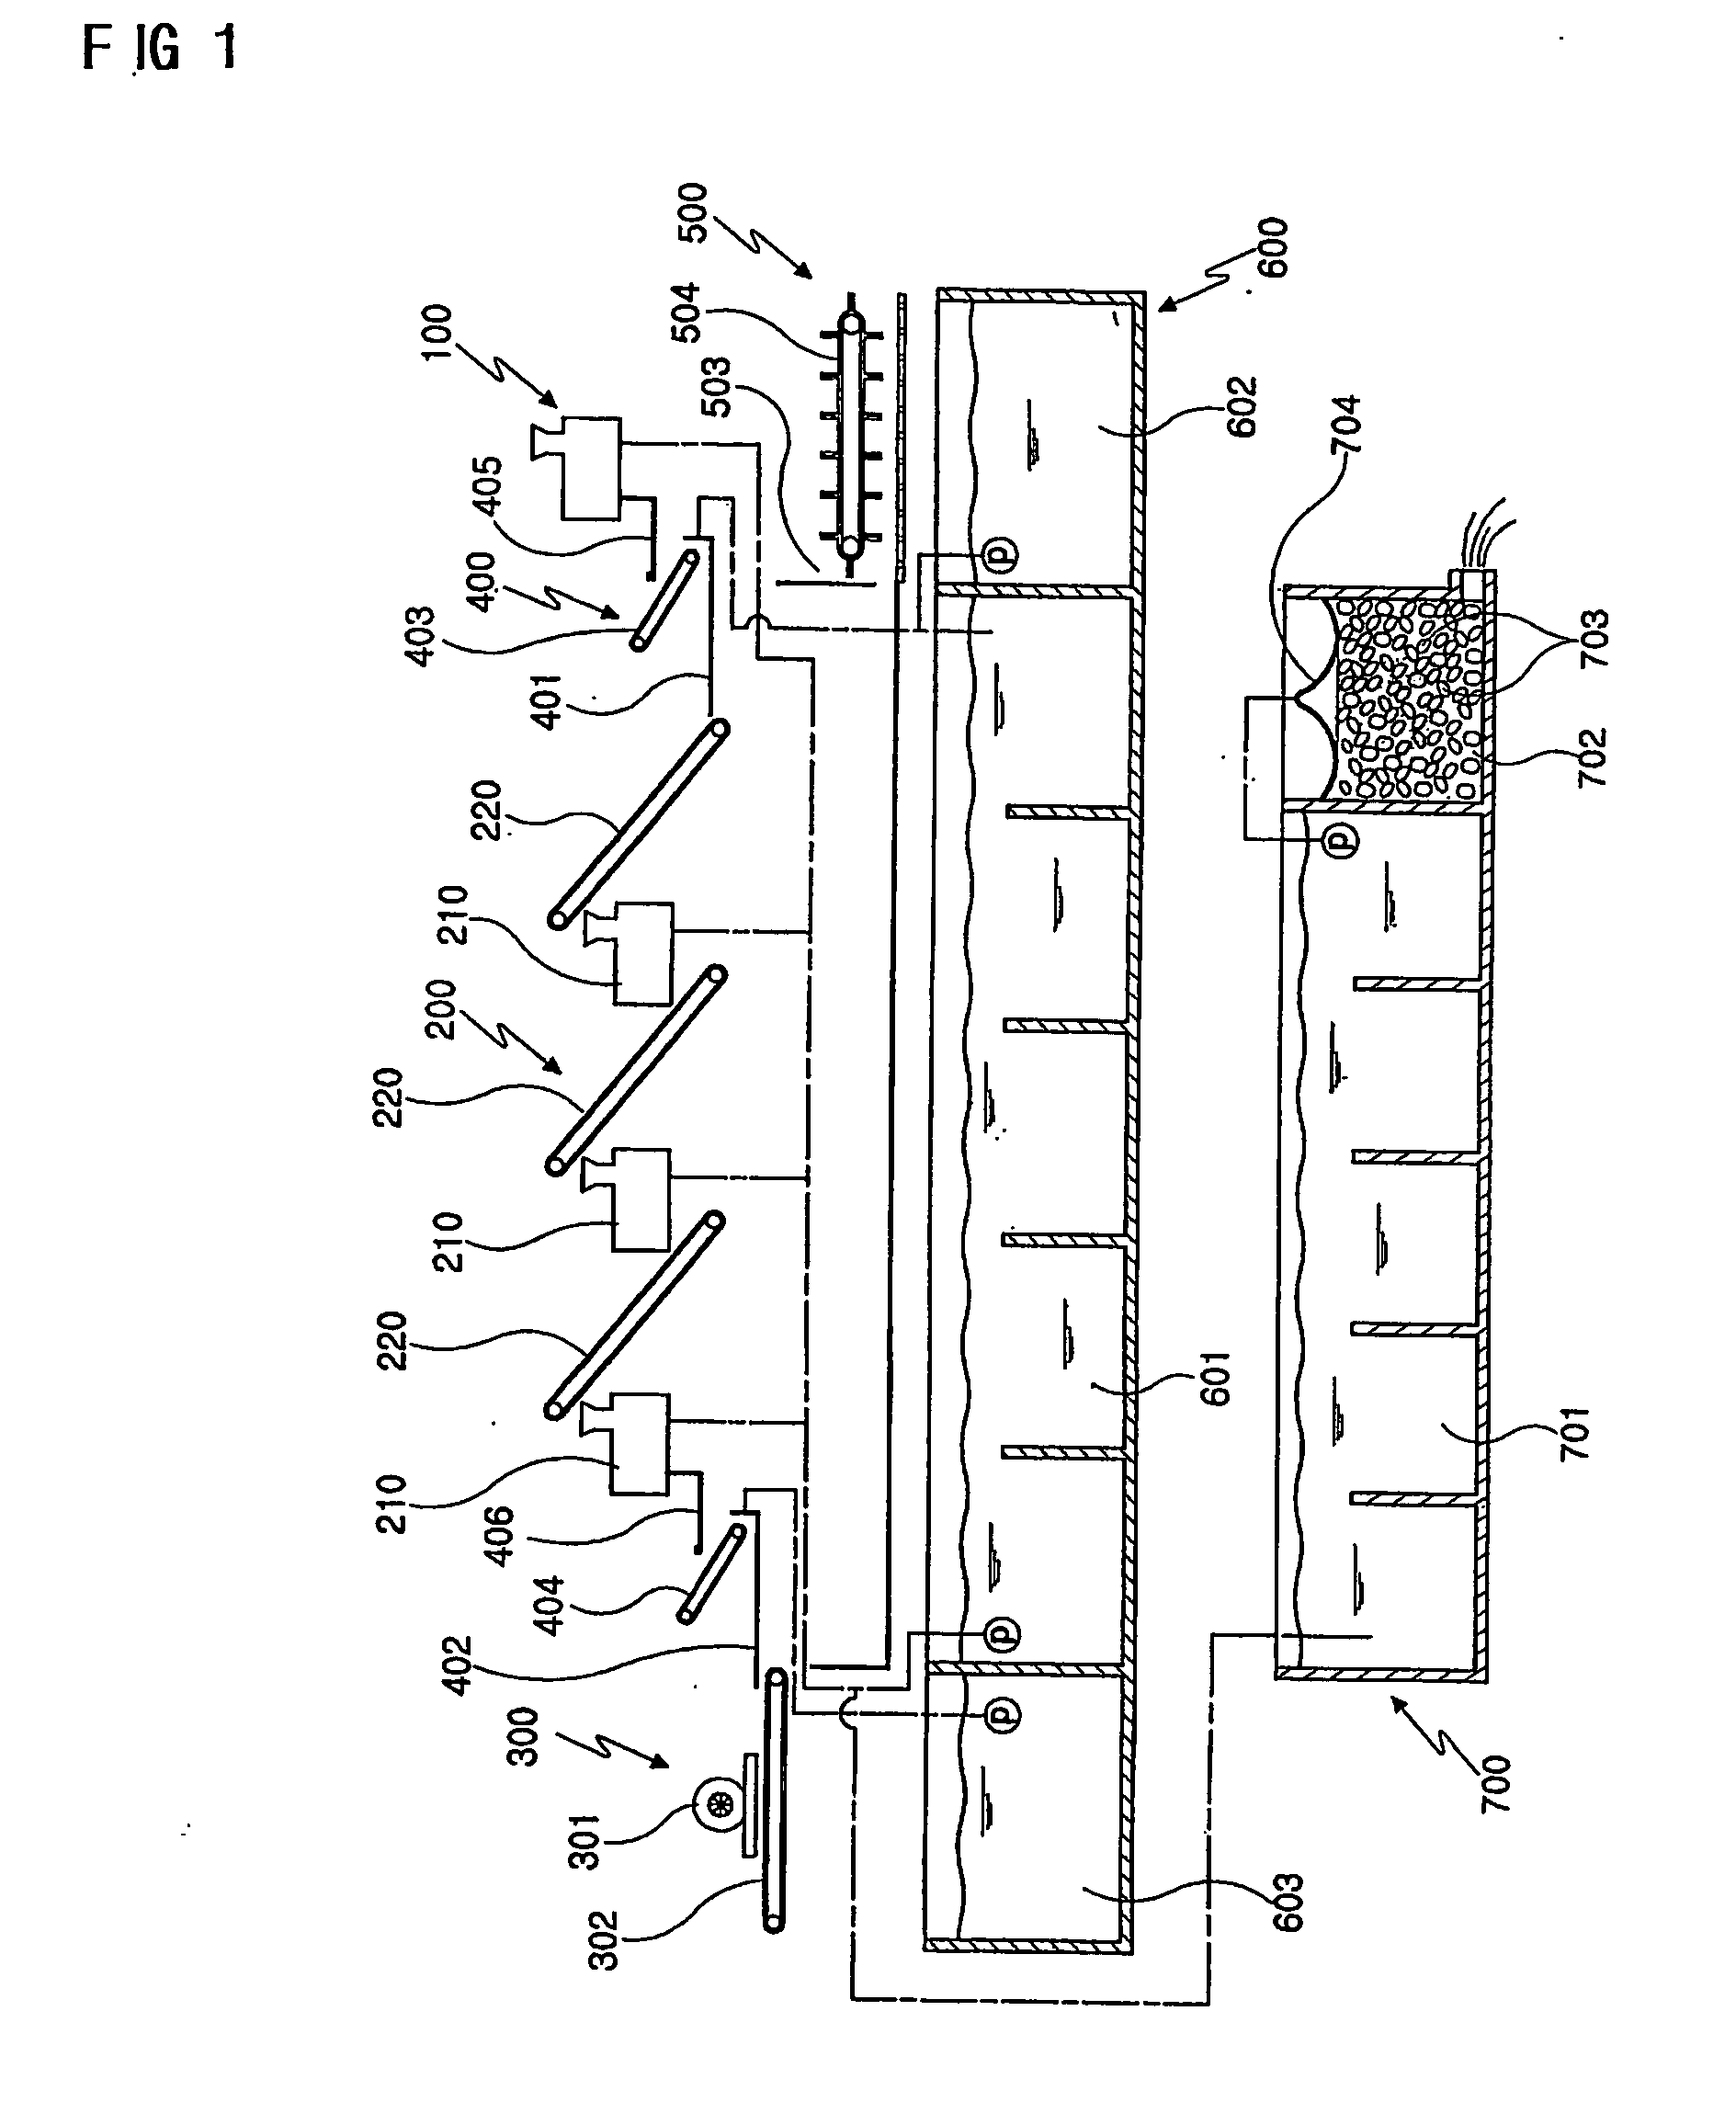 Apparatus for peeling outer skins of garlic using wet process